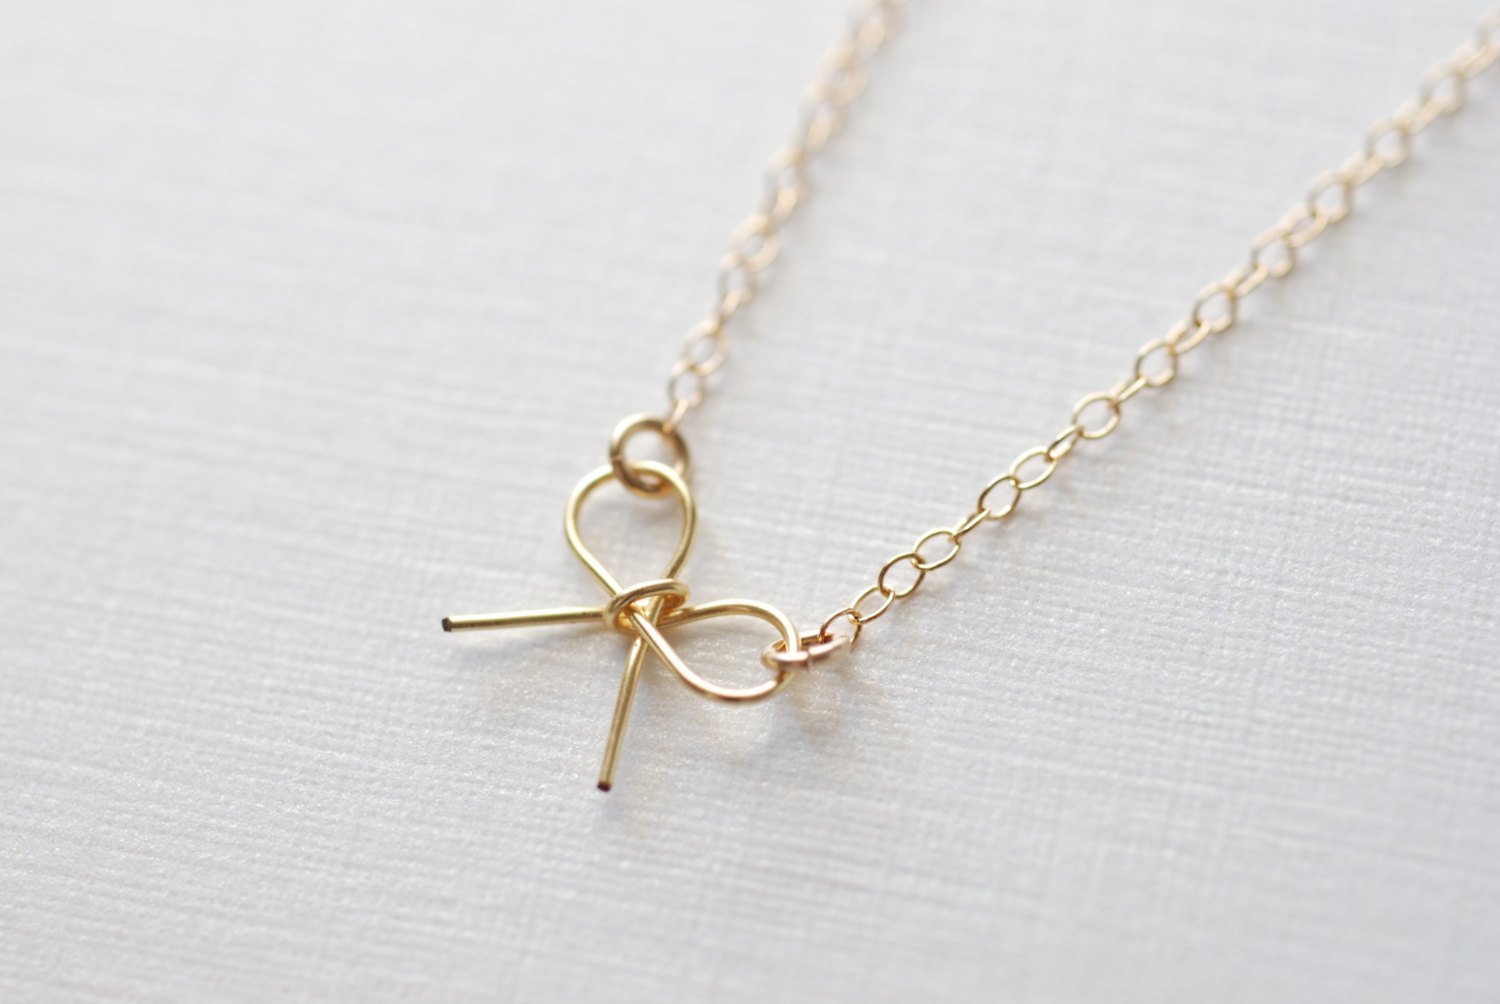 Gold Bow Necklace - 14 karat gold filled bow, gold filled bow necklace, Gold Ribbon Necklace, Dainty Jewerly by HeirloomEnvy - HarperCrown